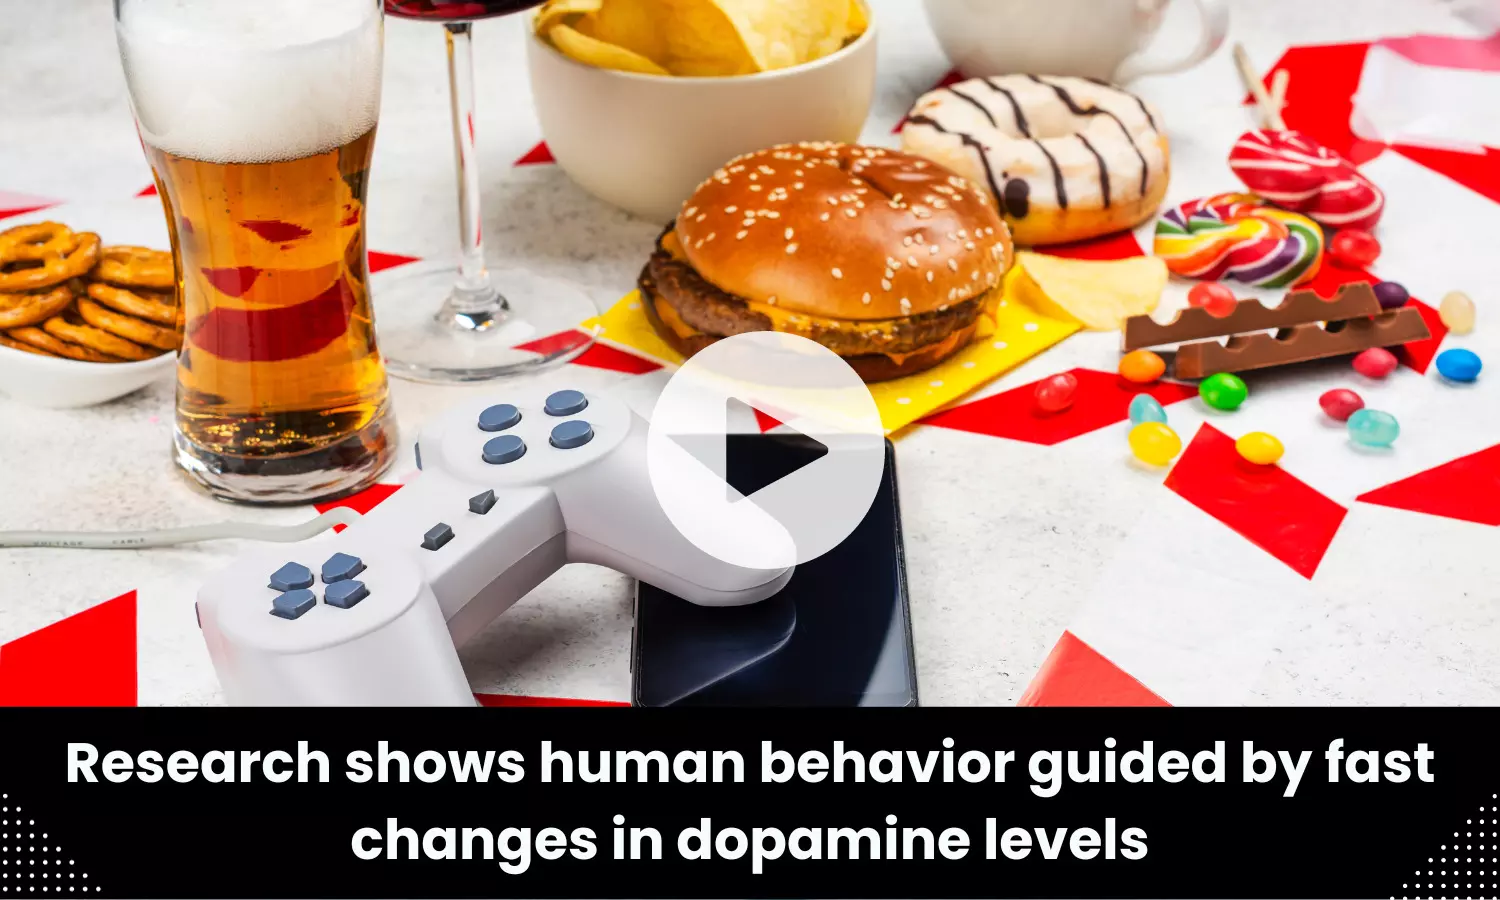 Research shows human behavior guided by fast changes in dopamine levels